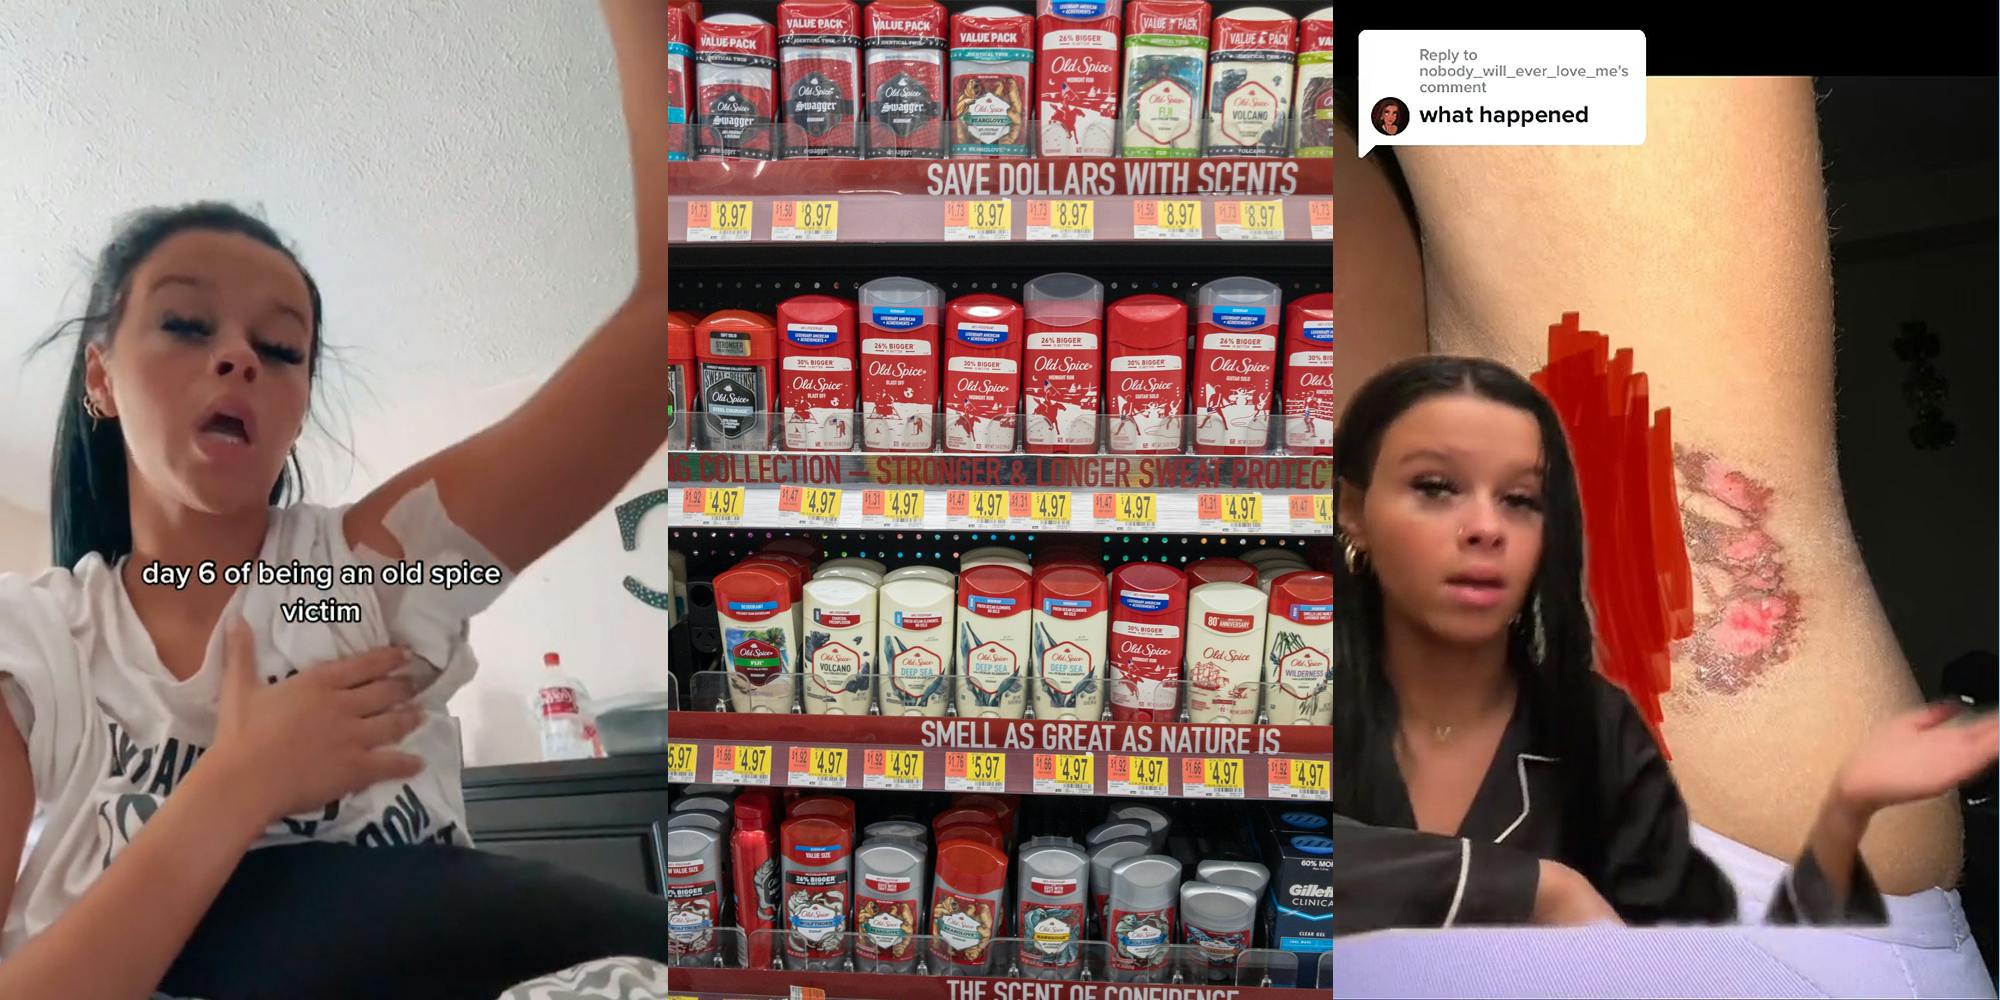 person holding up arm revealing bandage in armpit with caption "day 6 of being an old spice victim" (l) Old Spice deodorants on shelf at store (c) person greenscreen TikTok over image of chemical burn in armpit with caption "what happened" (r)